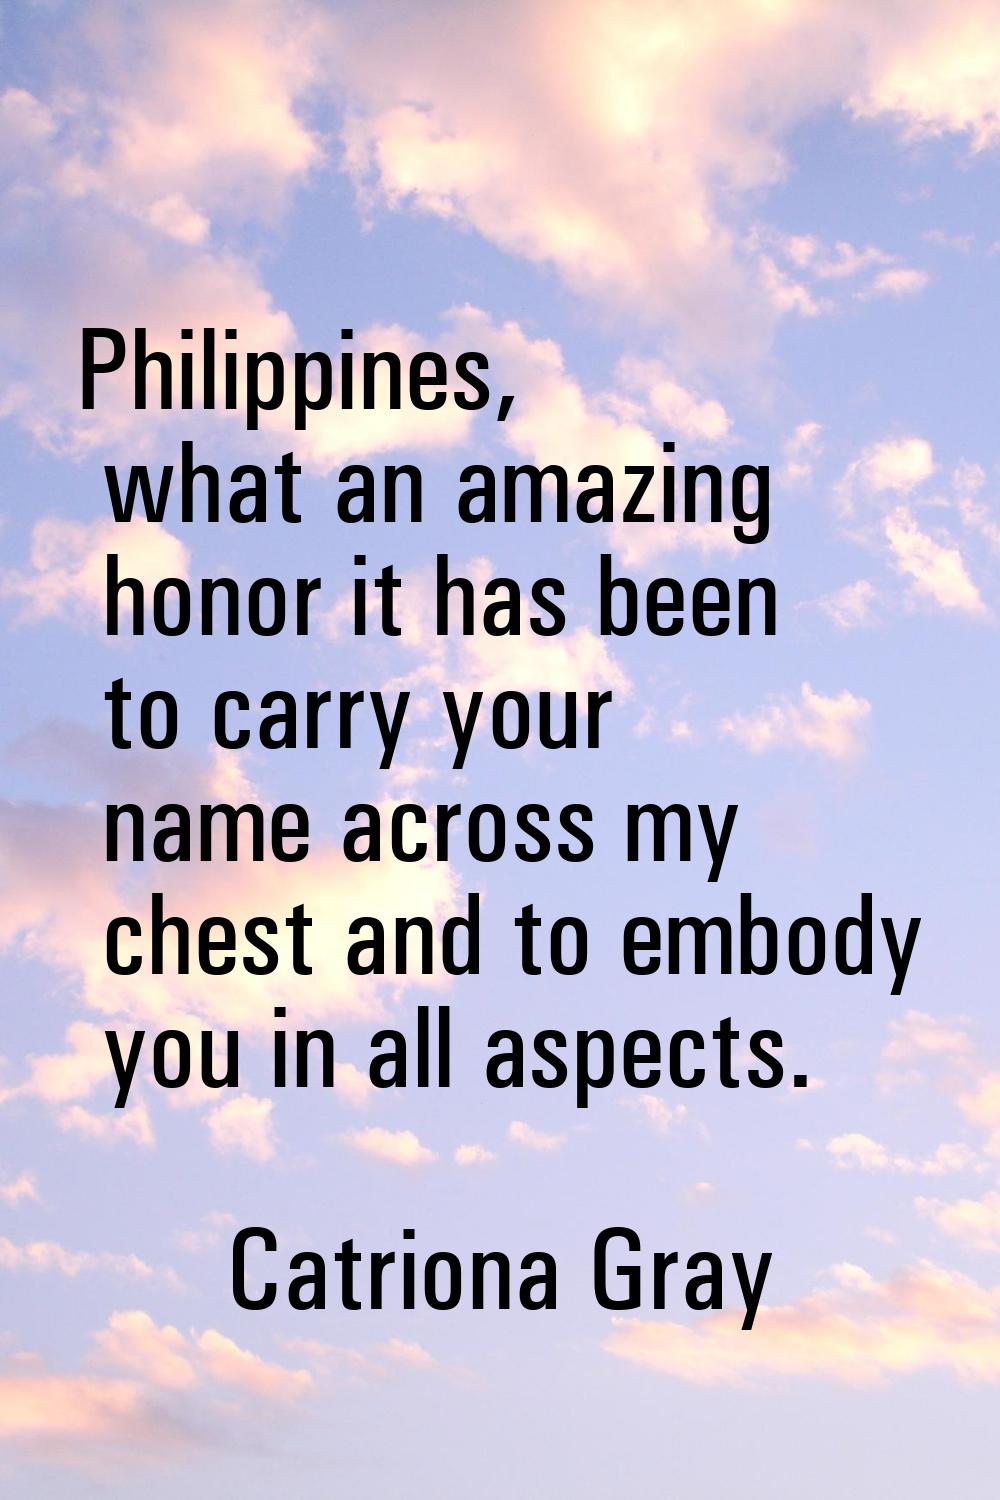 Philippines, what an amazing honor it has been to carry your name across my chest and to embody you